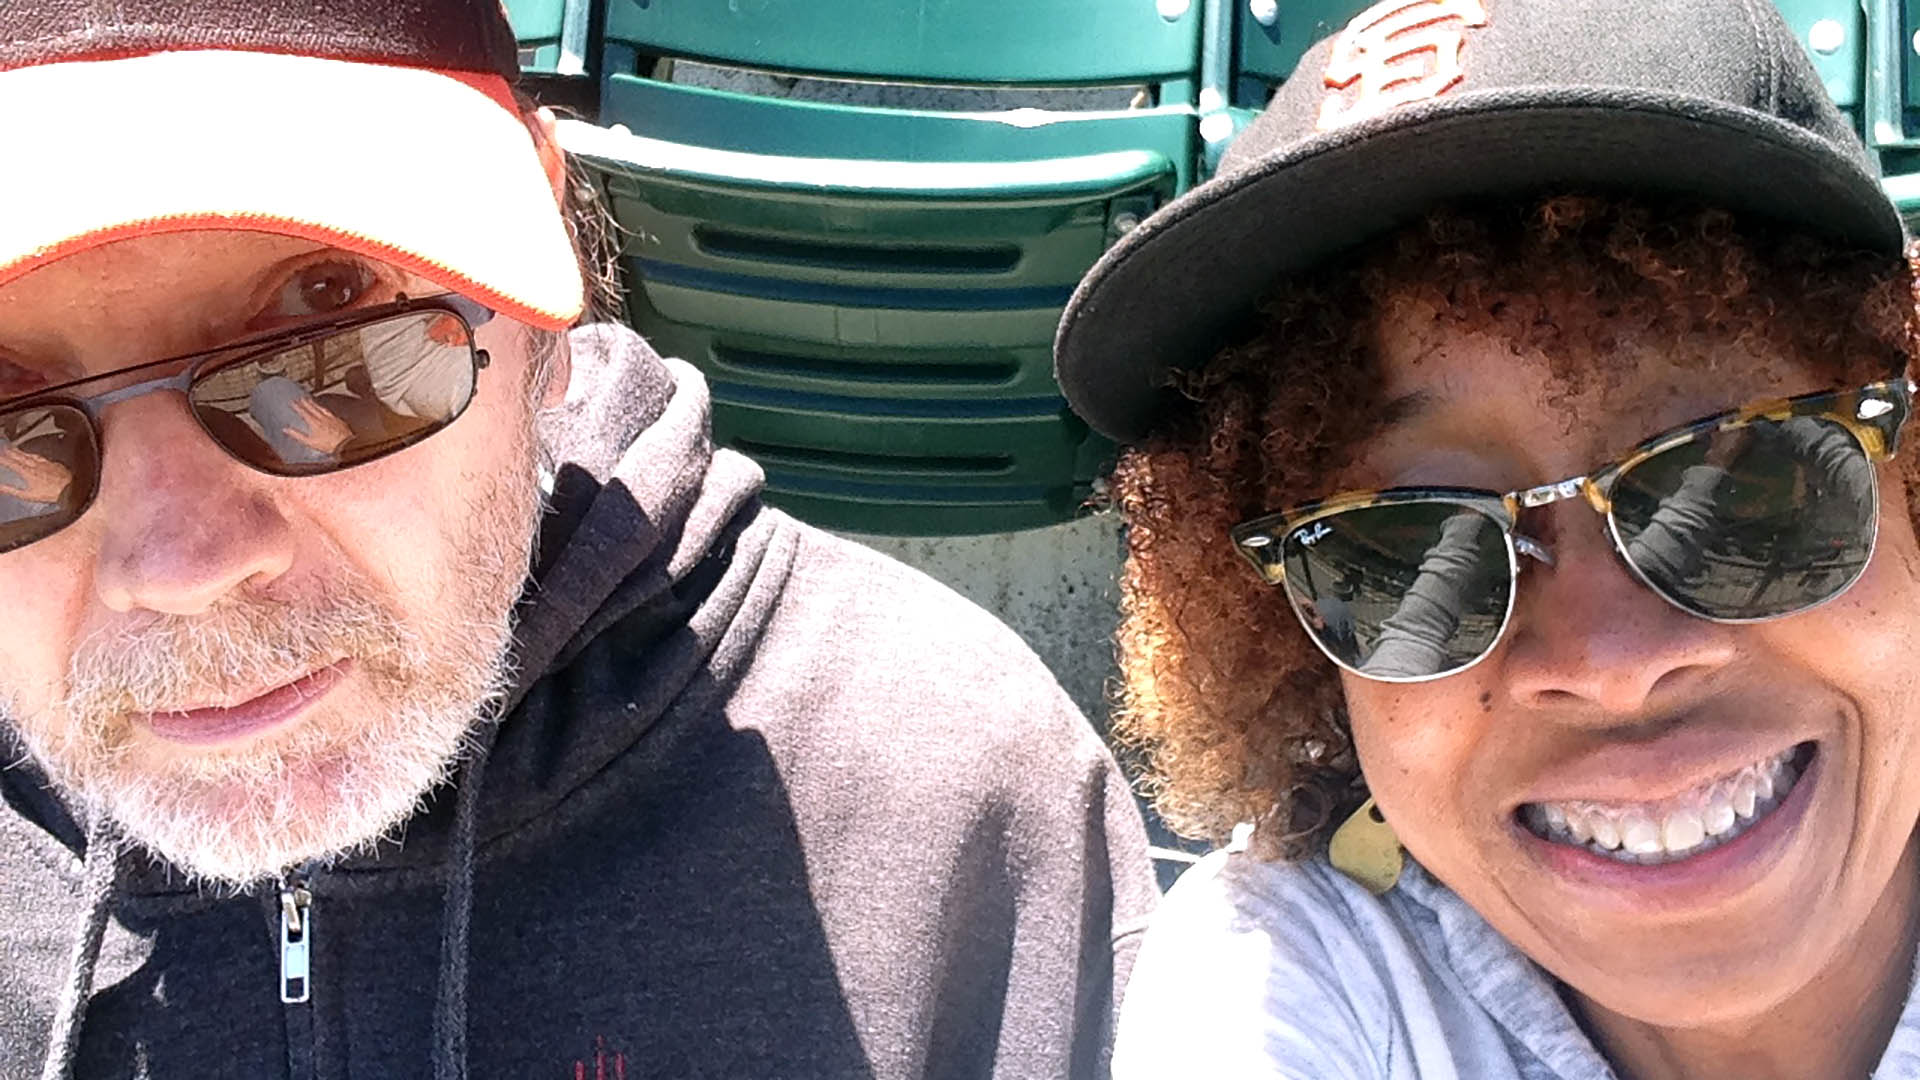 A man and woman wear baseball caps and sunglasses in a stadium.